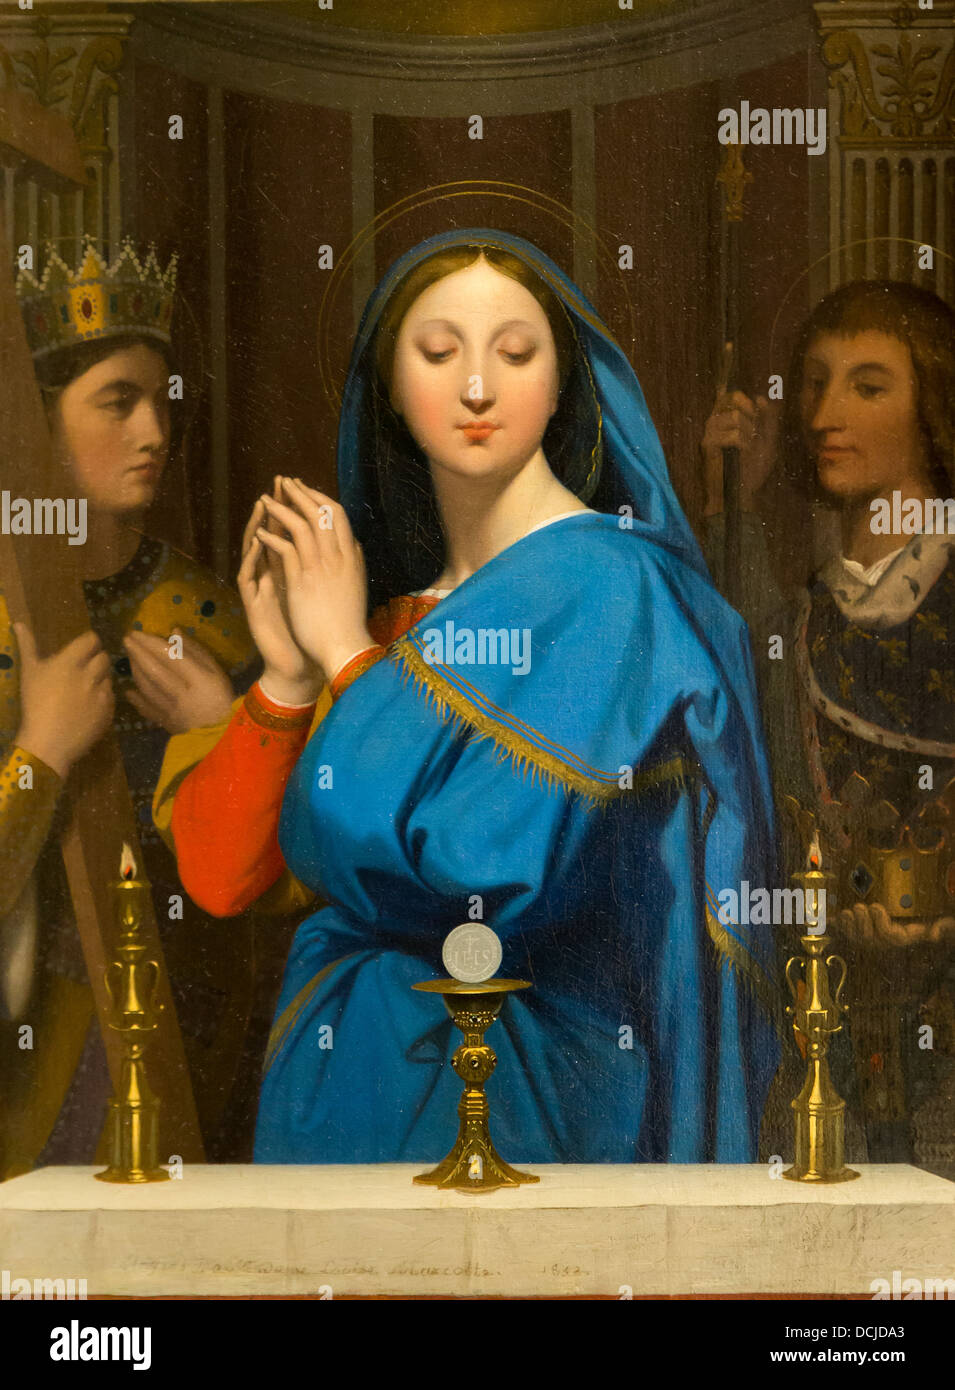 19th century  -  The Virging Adoring the Host, 1852 - Jean-Auguste-Dominique Ingres Philippe Sauvan-Magnet / Active Museum Stock Photo